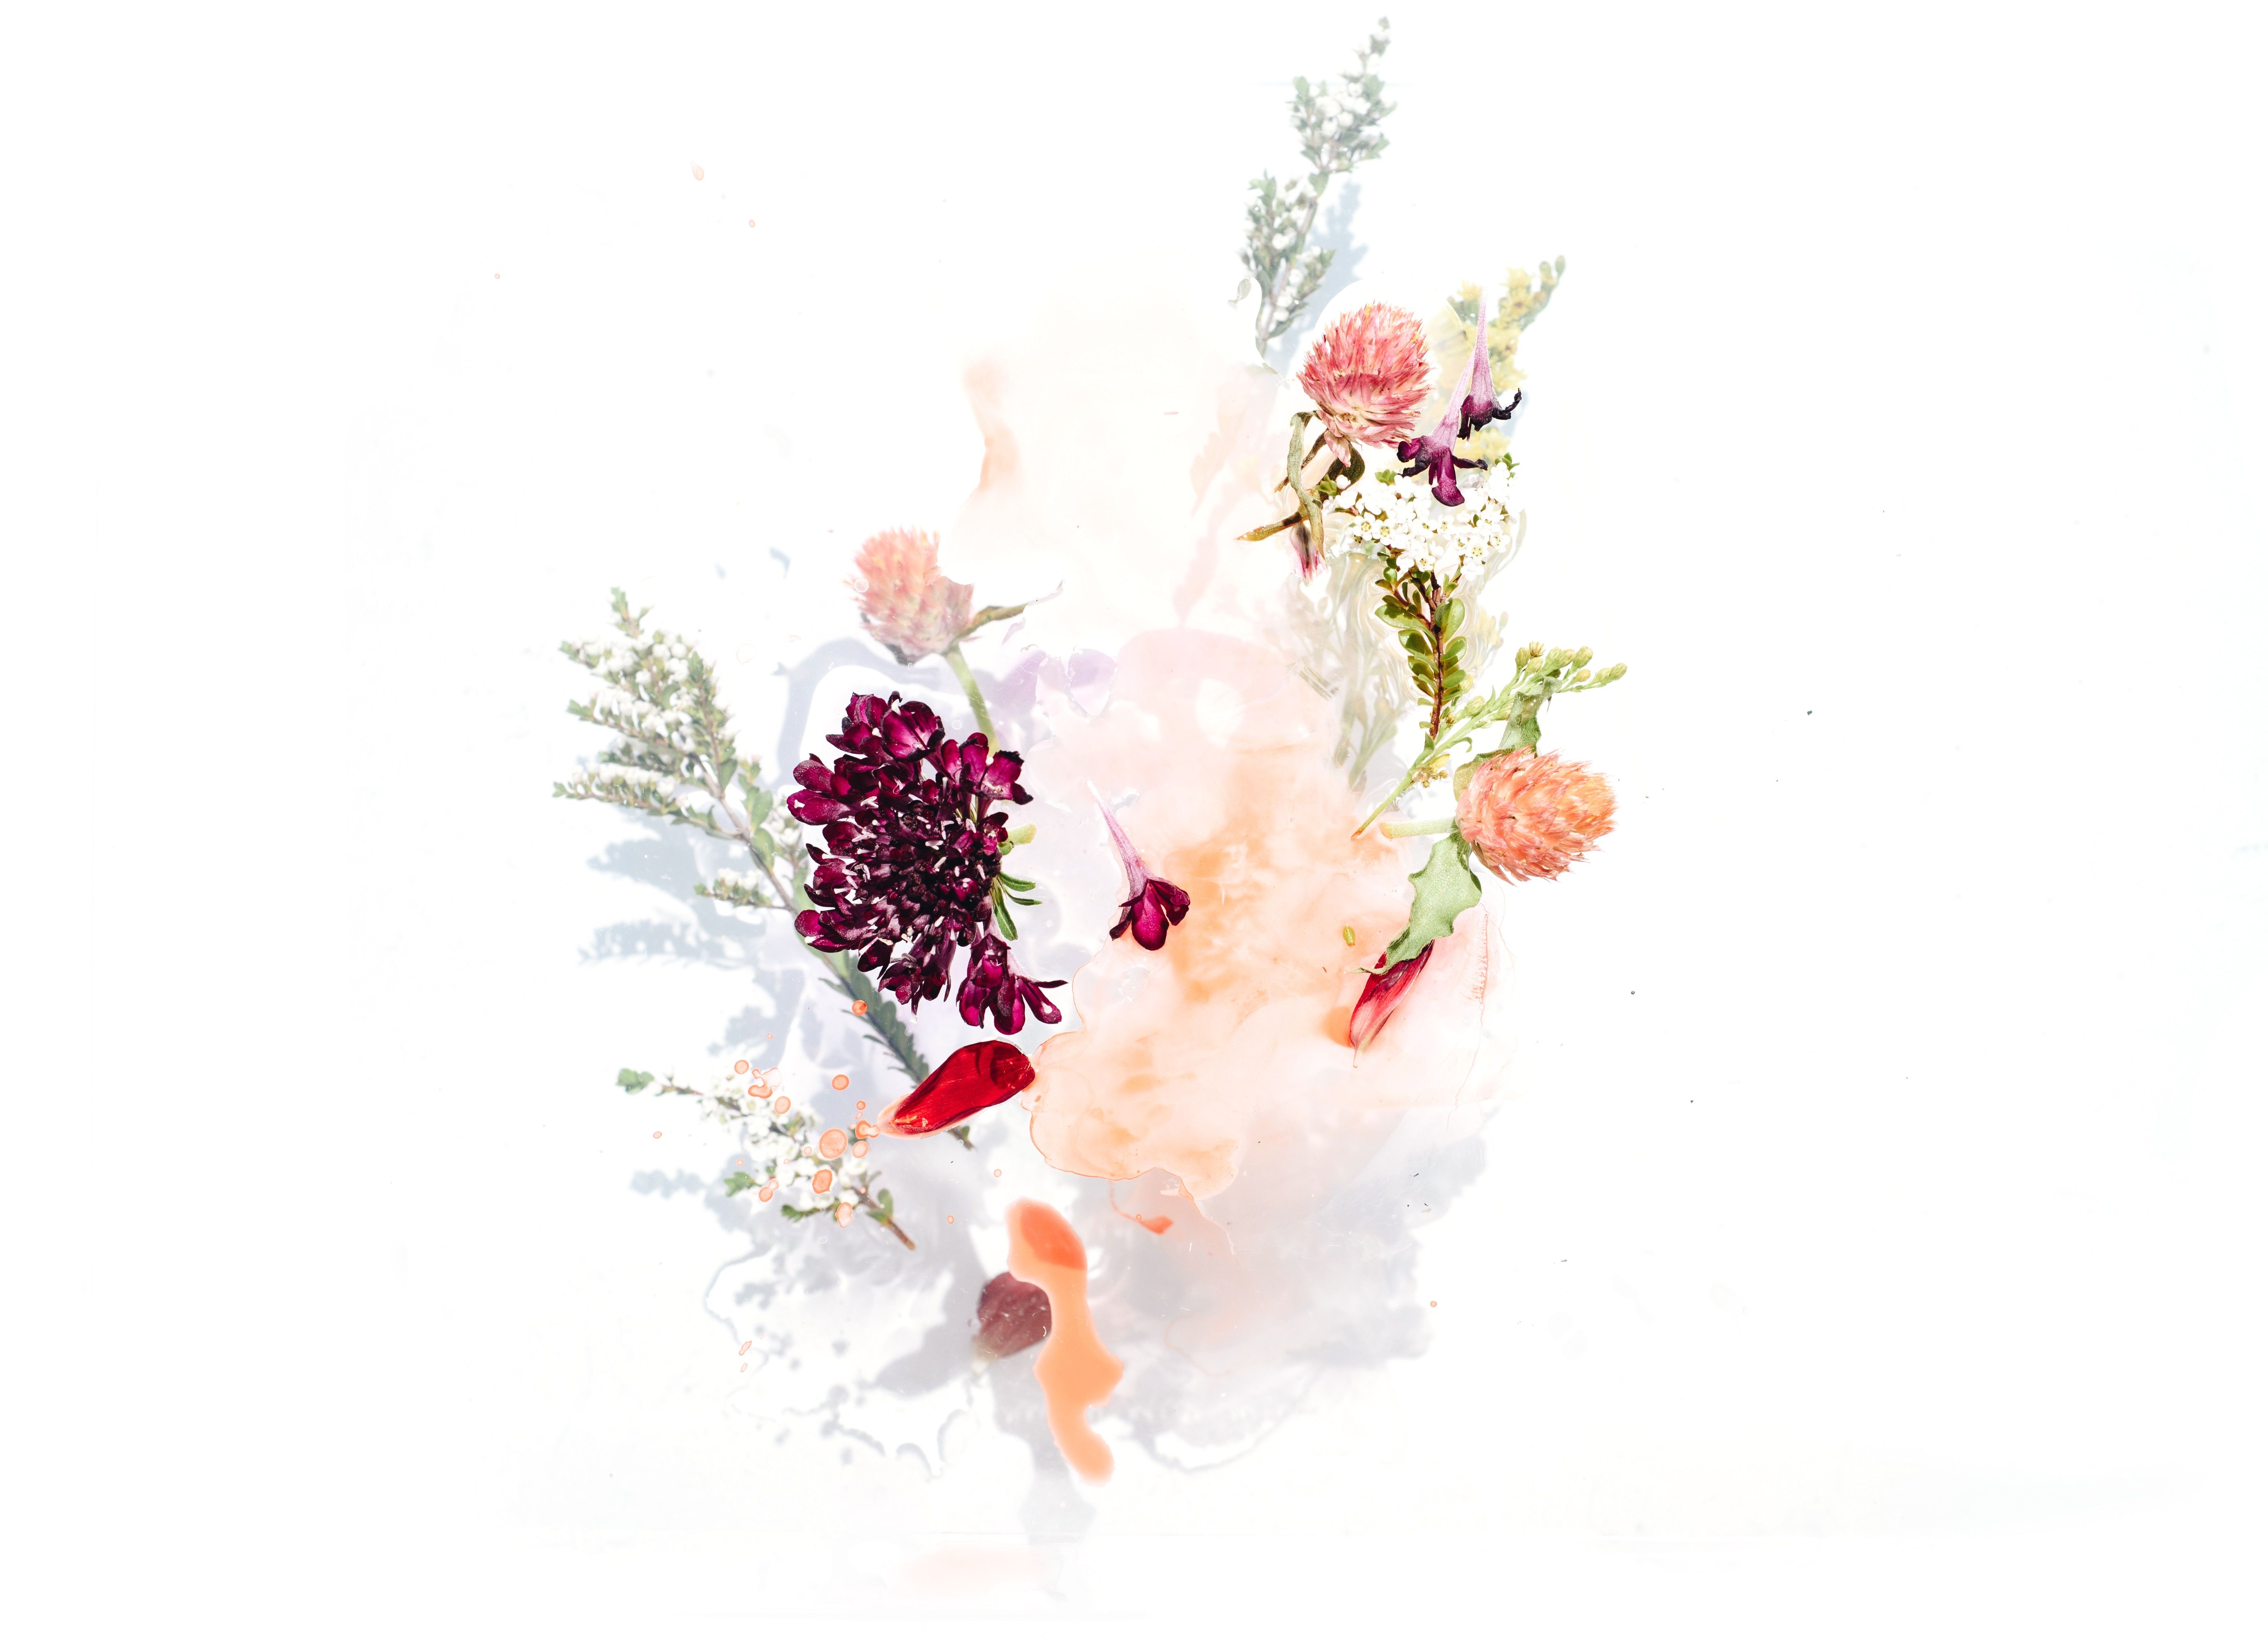 A still life image of flowers and smoke against a white background - Bright